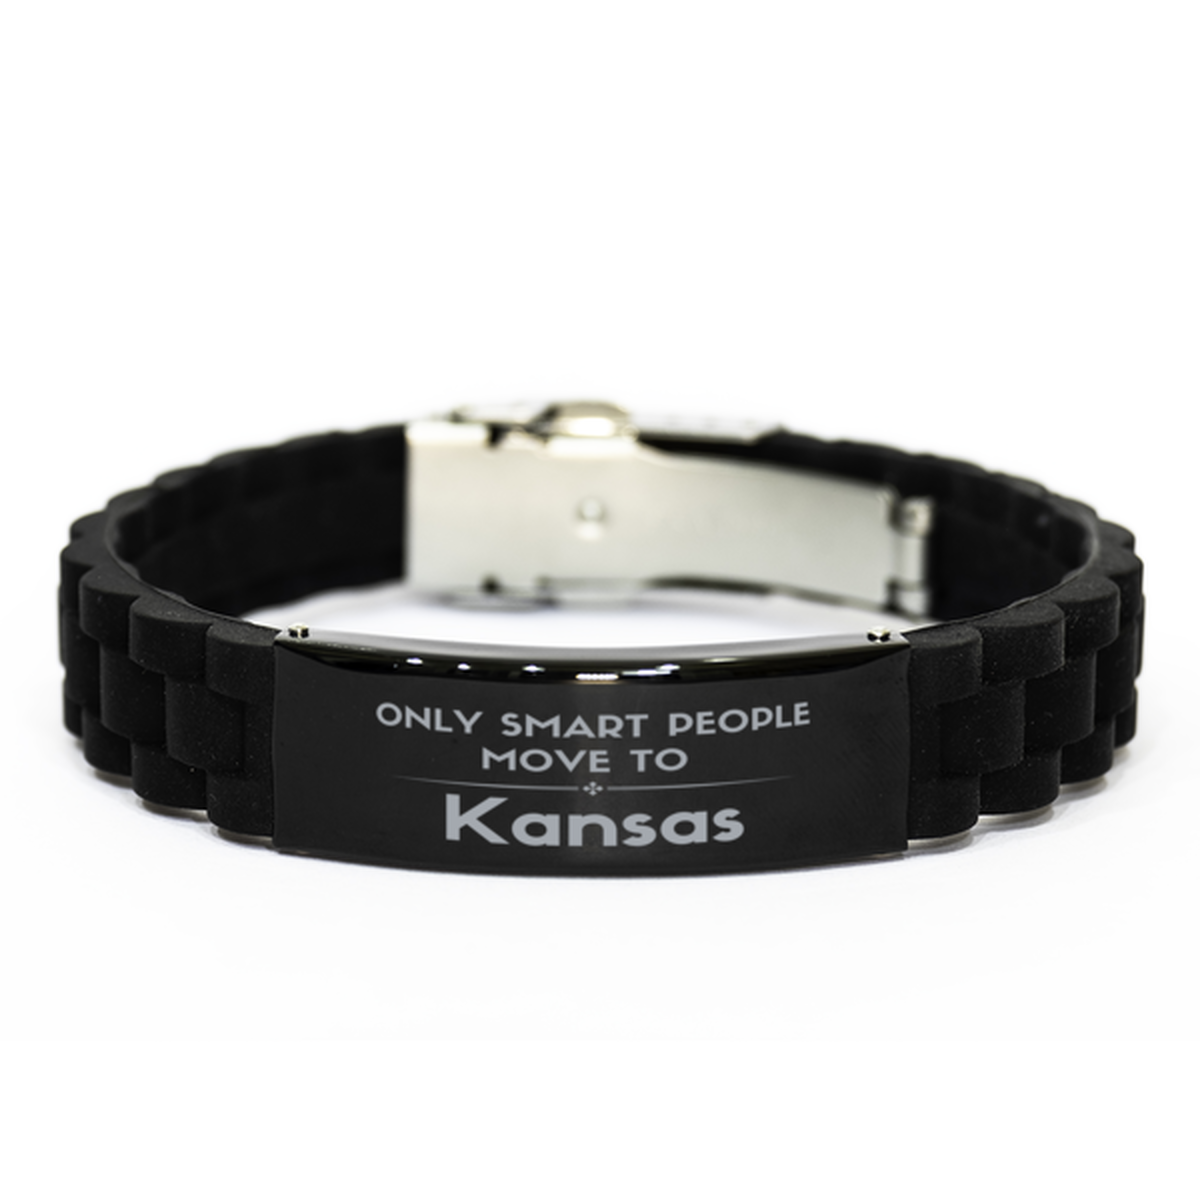 Only smart people move to Kansas Black Glidelock Clasp Bracelet, Gag Gifts For Kansas, Move to Kansas Gifts for Friends Coworker Funny Saying Quote